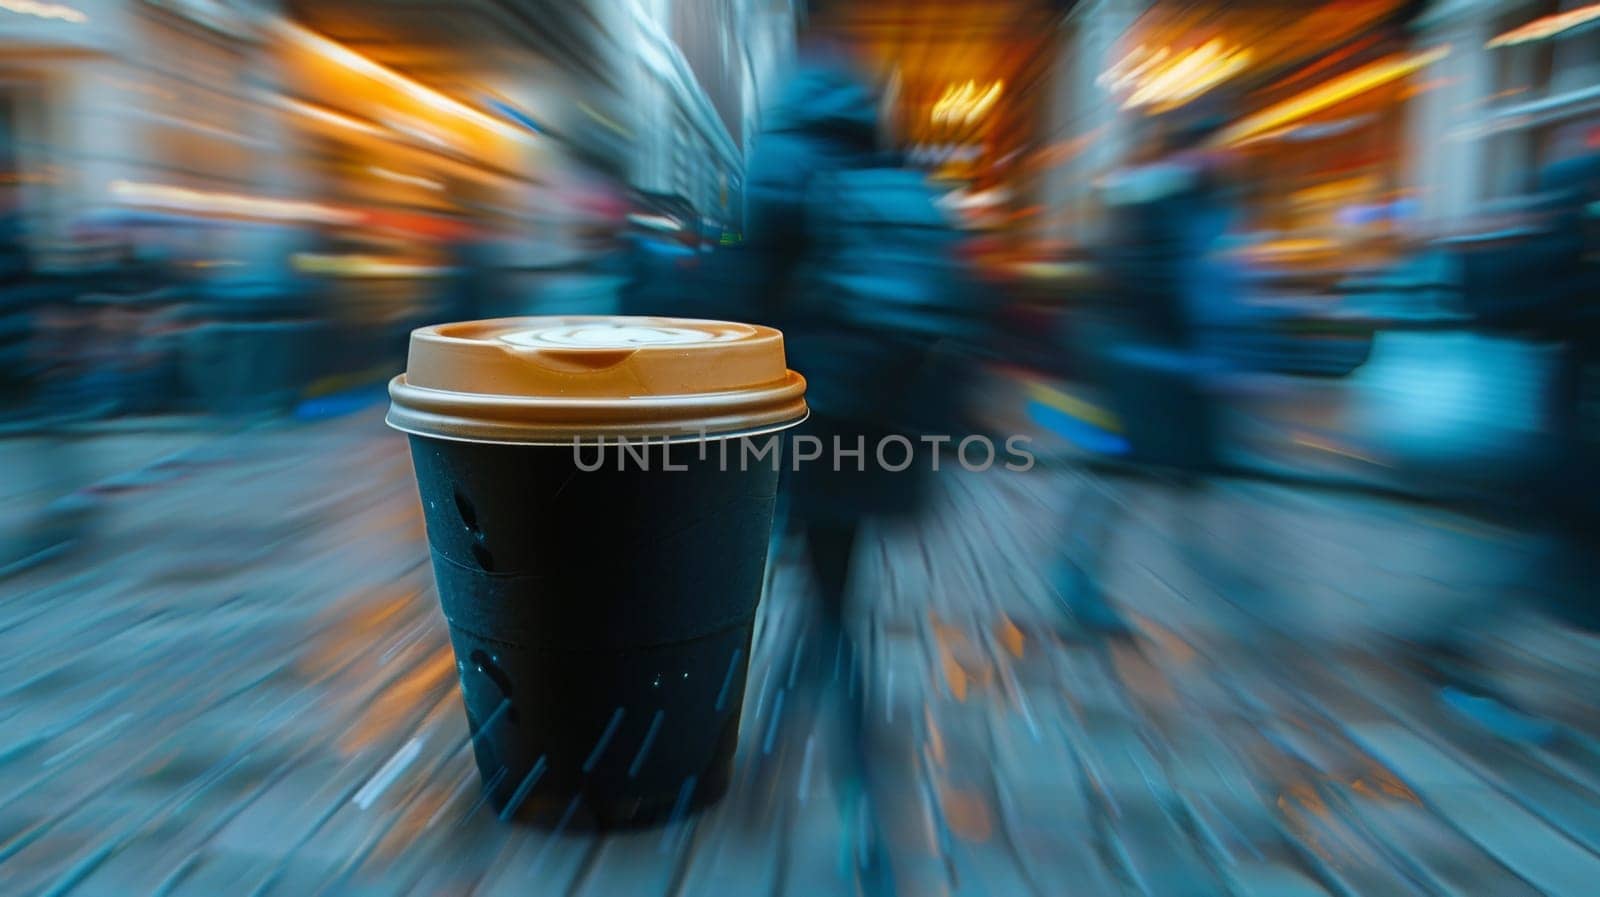 A blurry image of a coffee cup sitting on the sidewalk, AI by starush